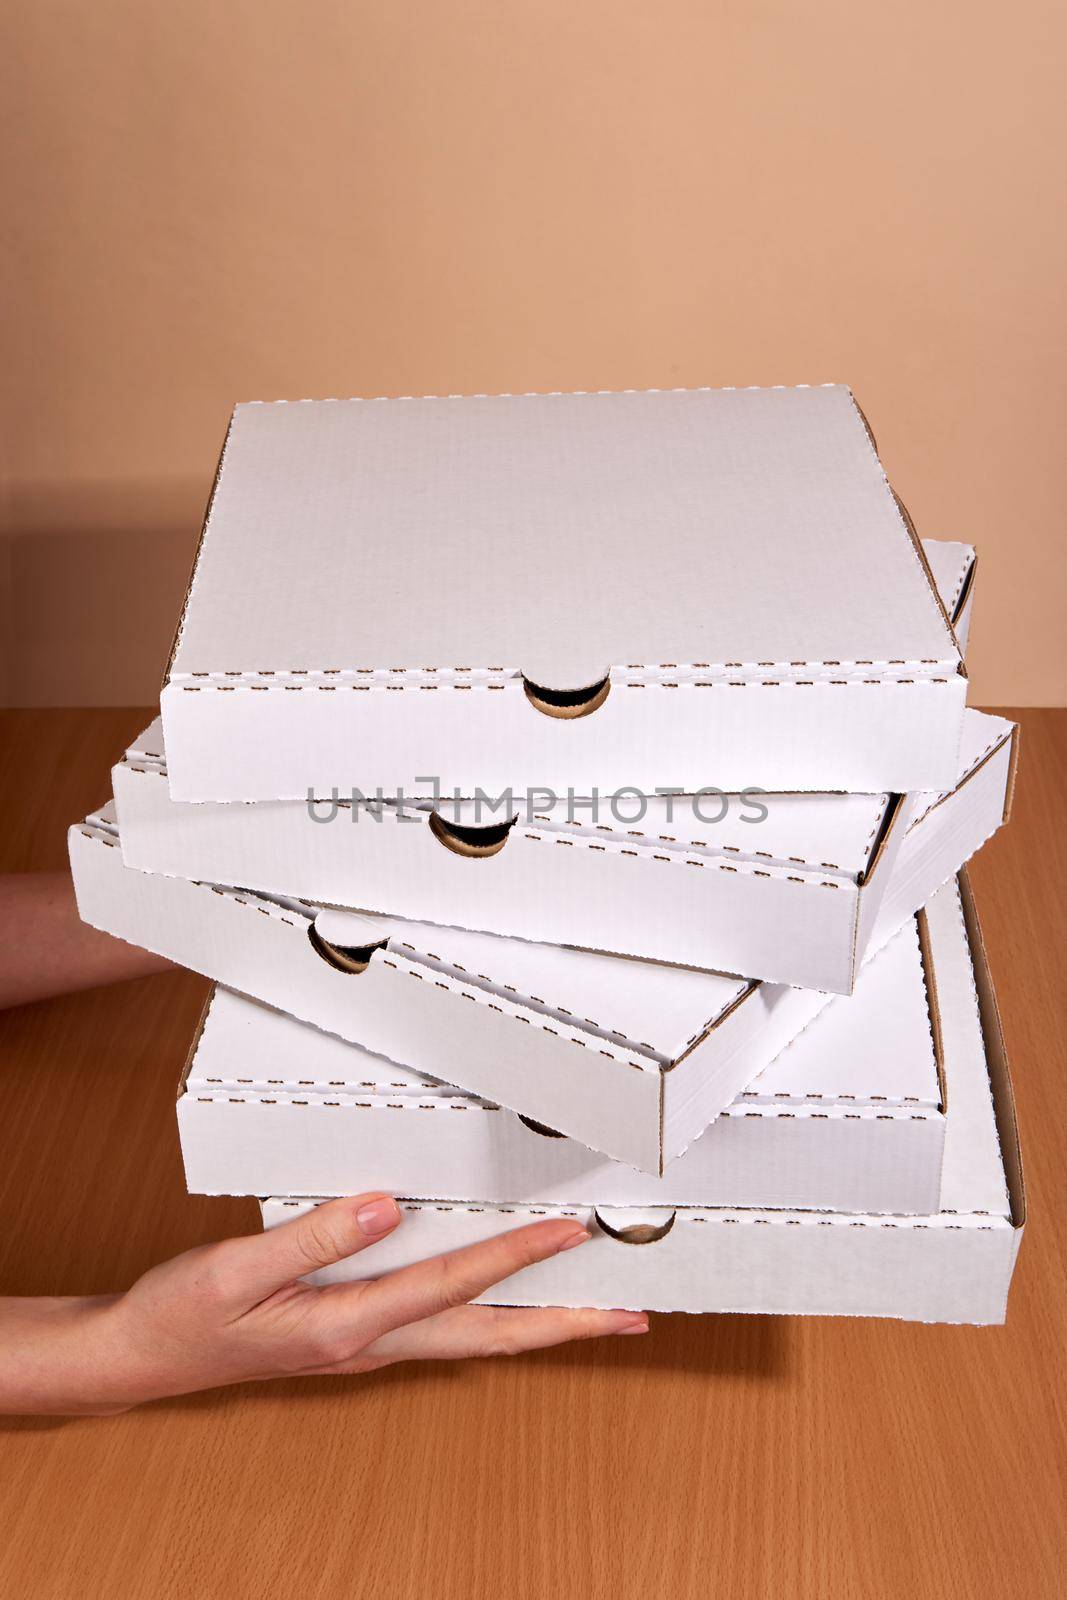 Hands stretching boxes with pizza home delivery by Demkat